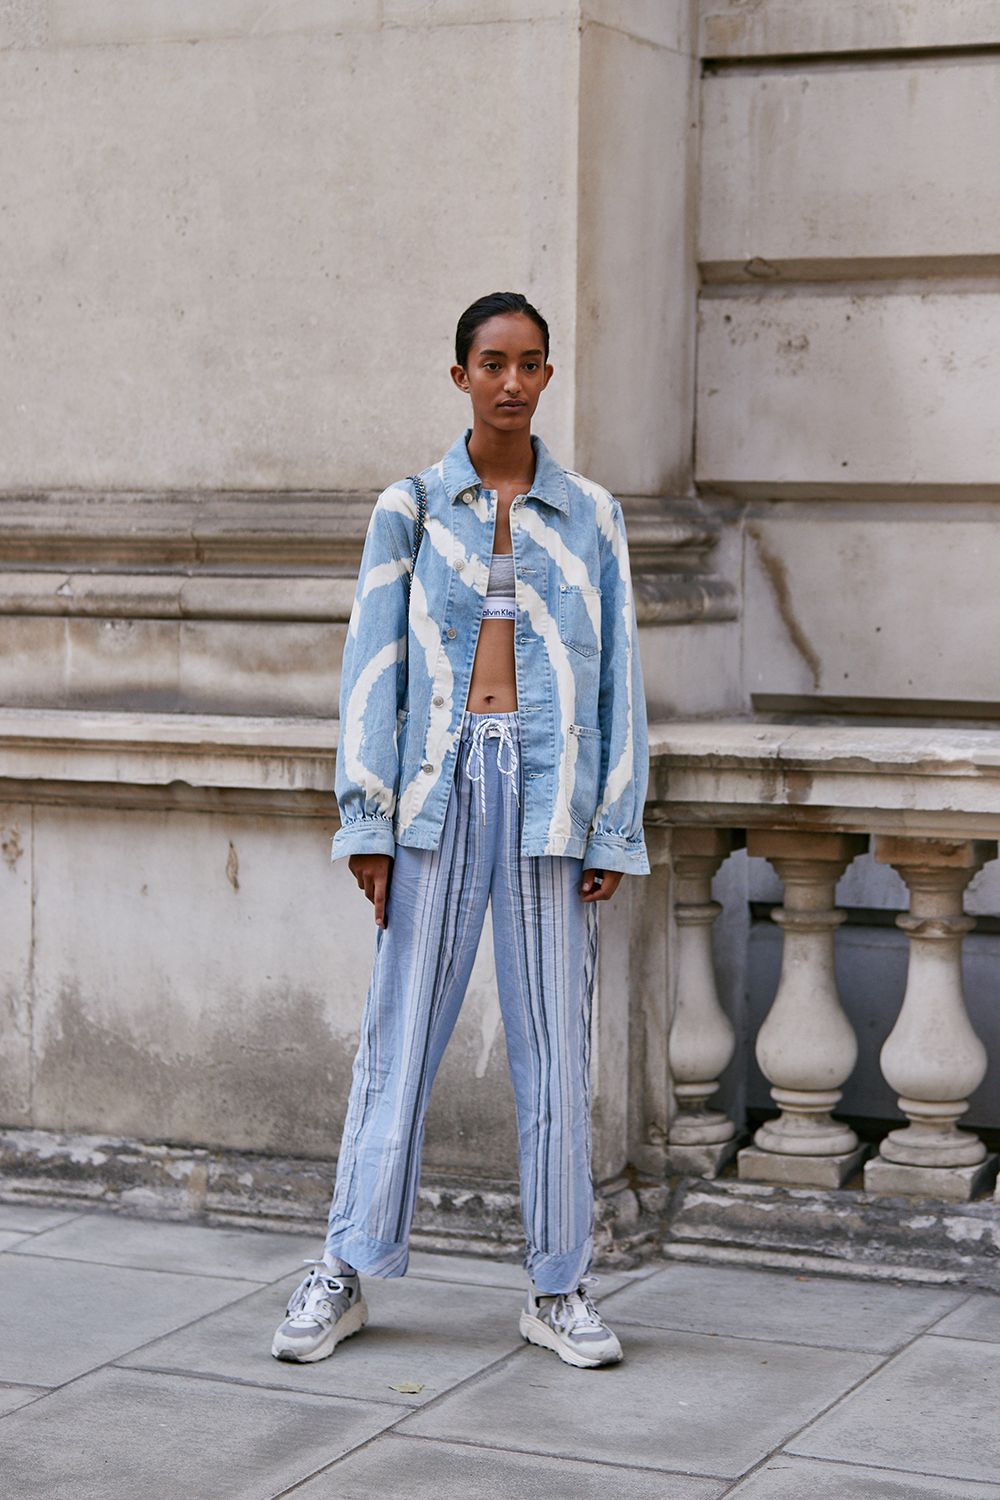 The Latest Street Style From London Fashion Week | Who What Wear